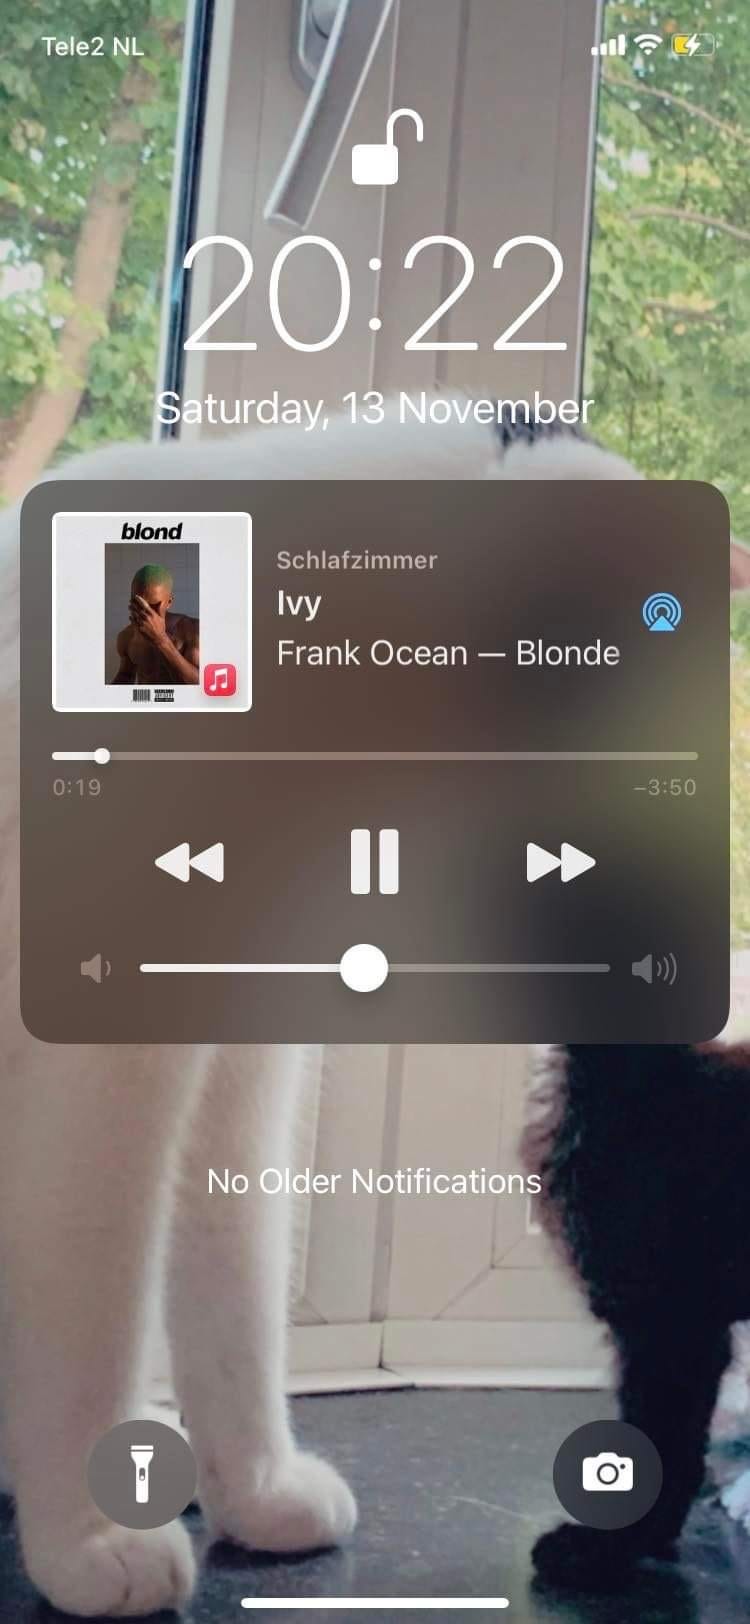 Screenshot of iOS showing now playing: Ivy by Frank Ocean